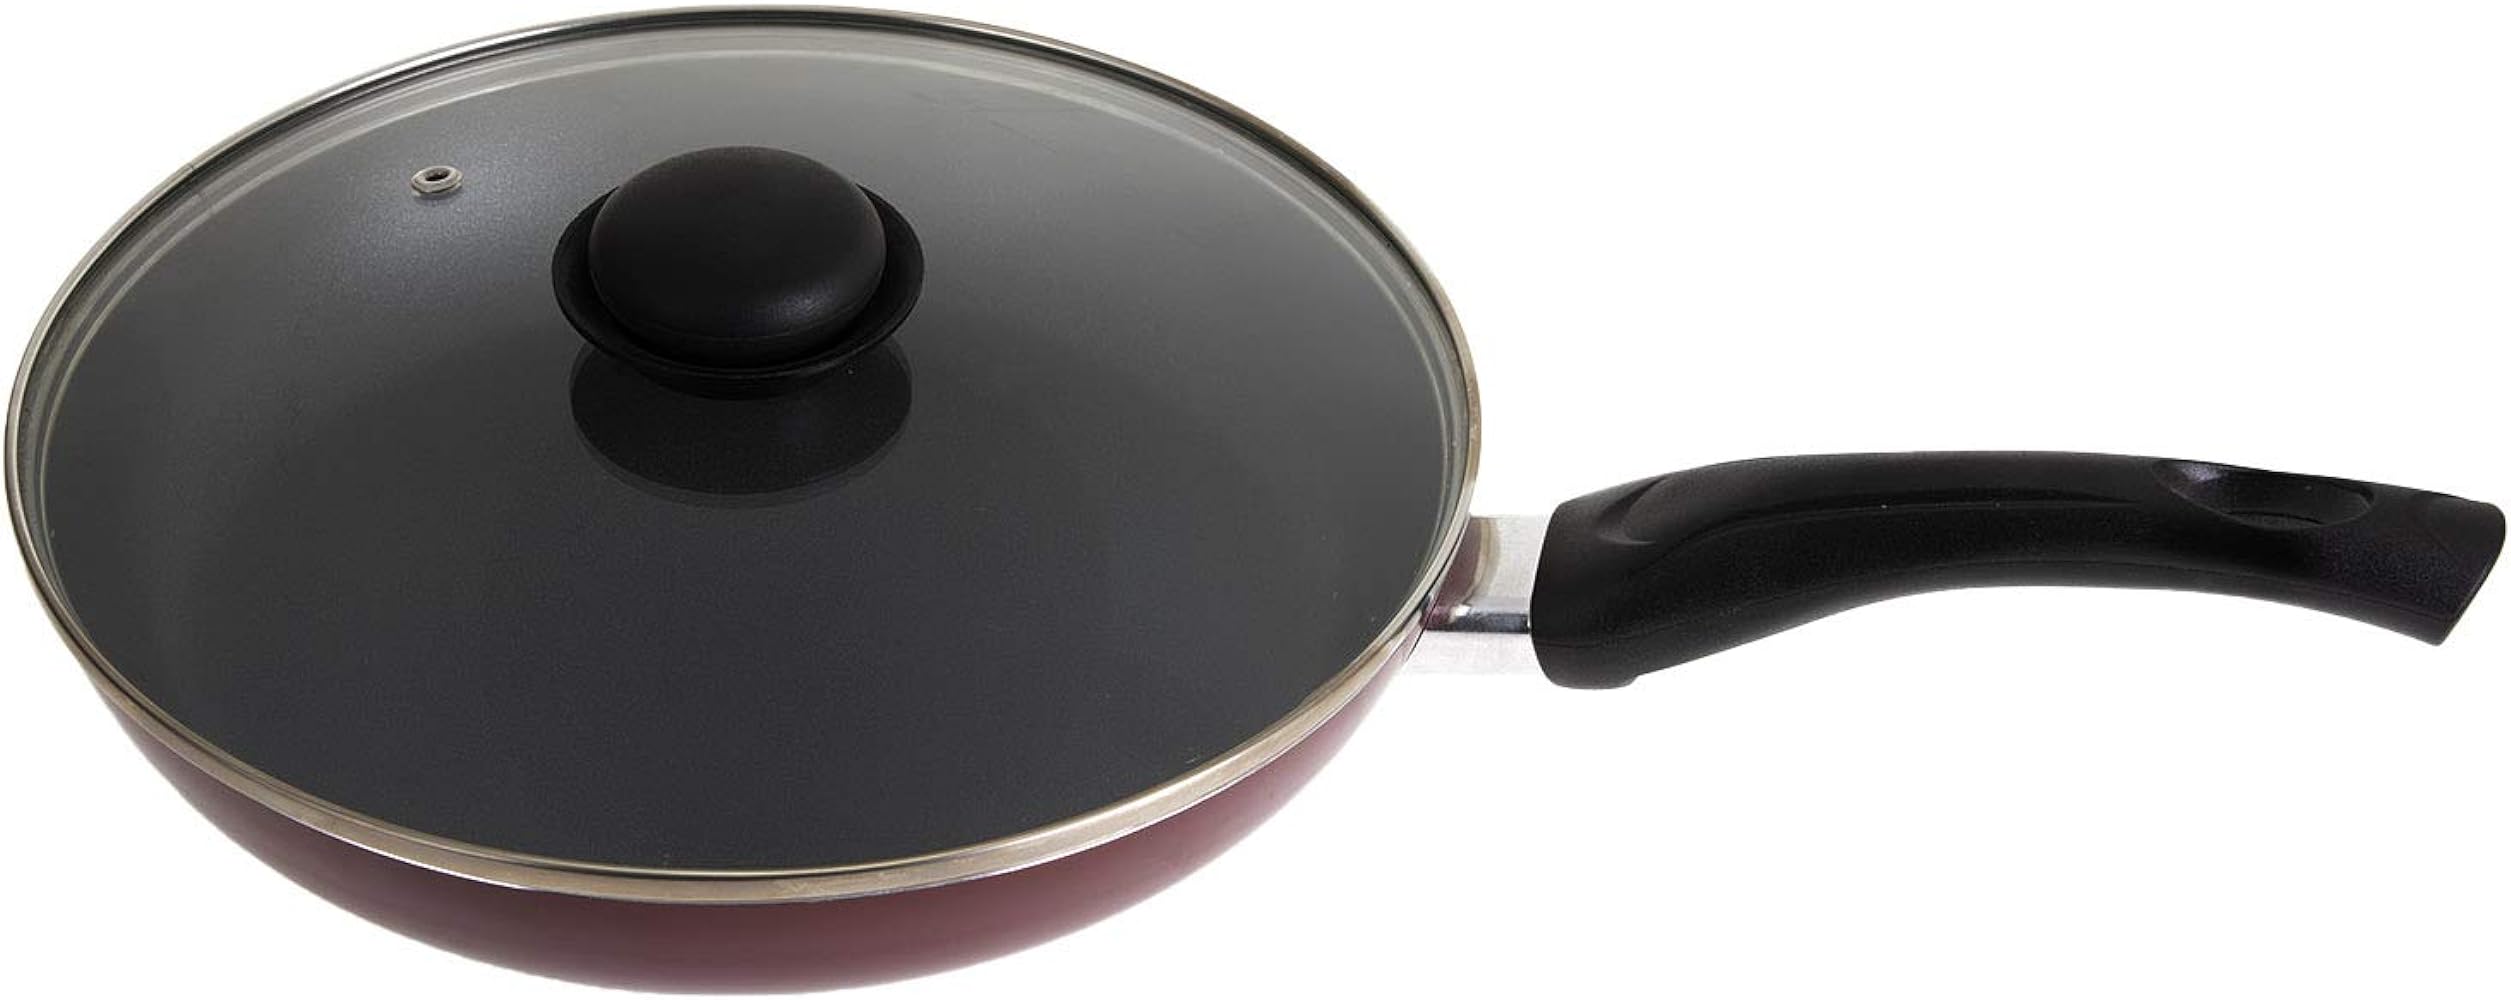 Royalford Frying Pan, 26 cm- Aluminum Non-Stick Fry Pan – Ergonomic Handle - Saute Pan/Deep Frying Pan with Glass Lid – Suitable for Multiple Hob Types - Ideal for Frying Sautéing Stir Frying